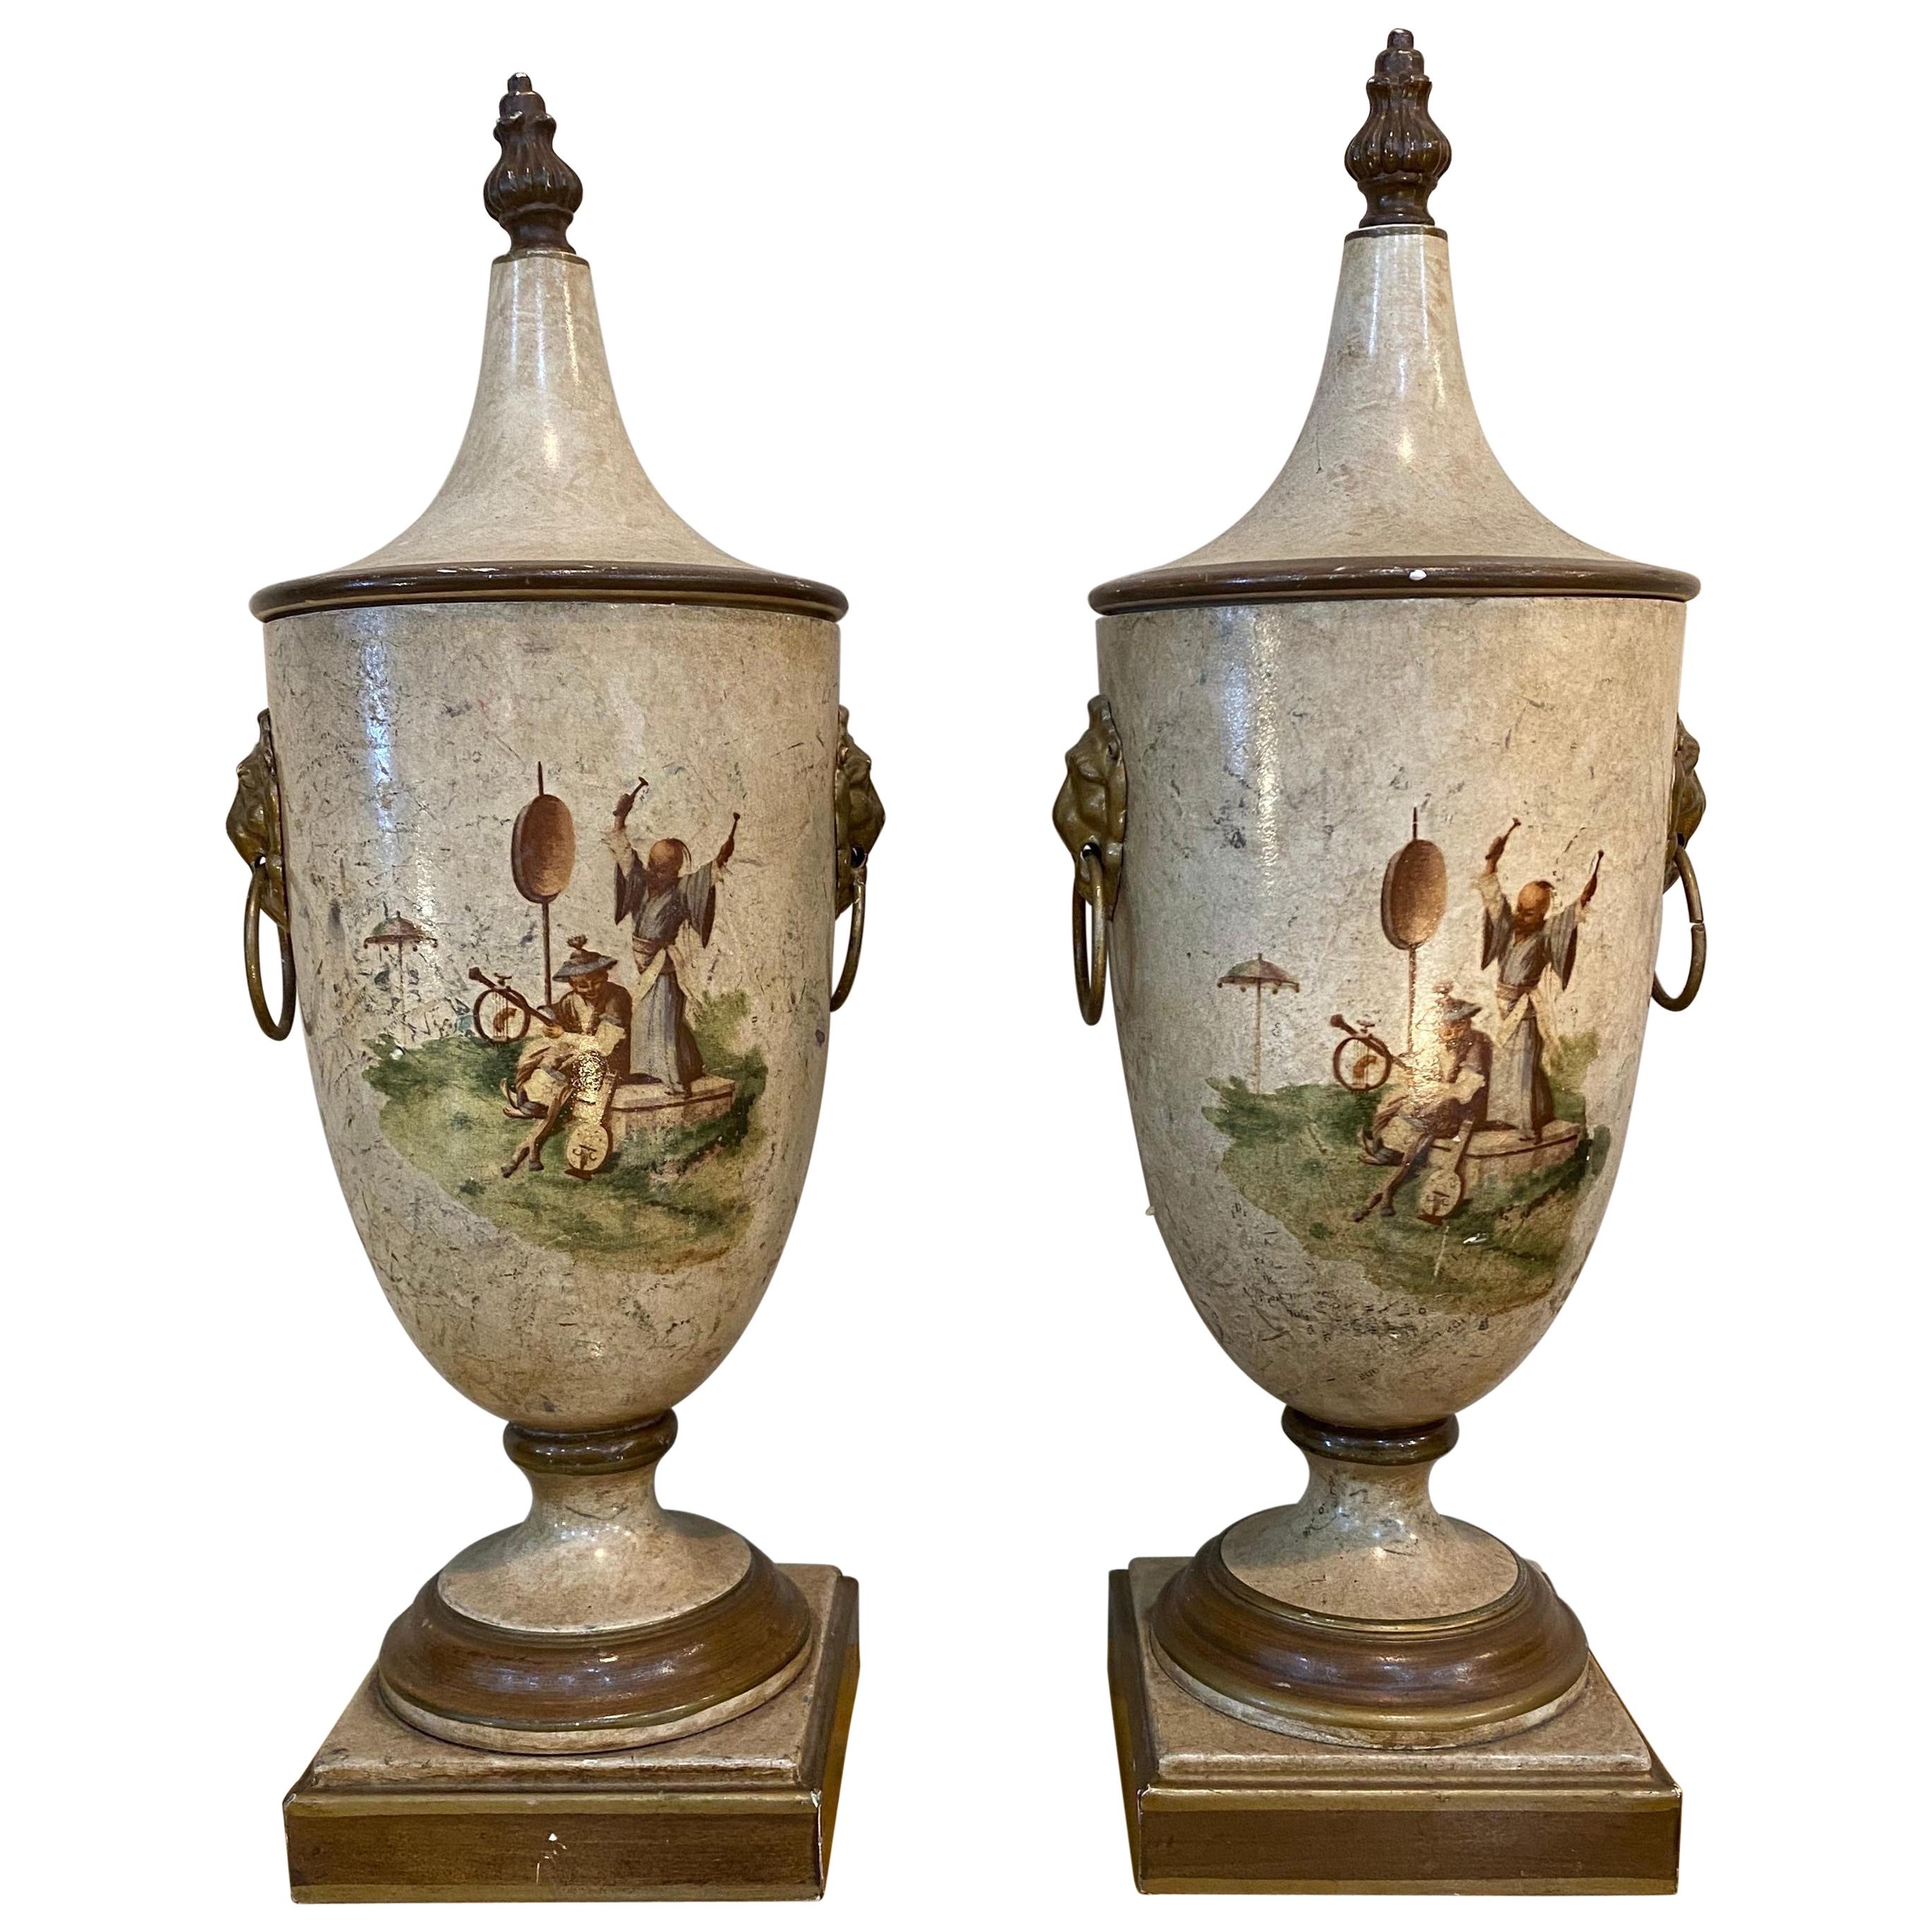 Pair of Italian Made Vintage White Chinoiserie Style Chestnut Urns